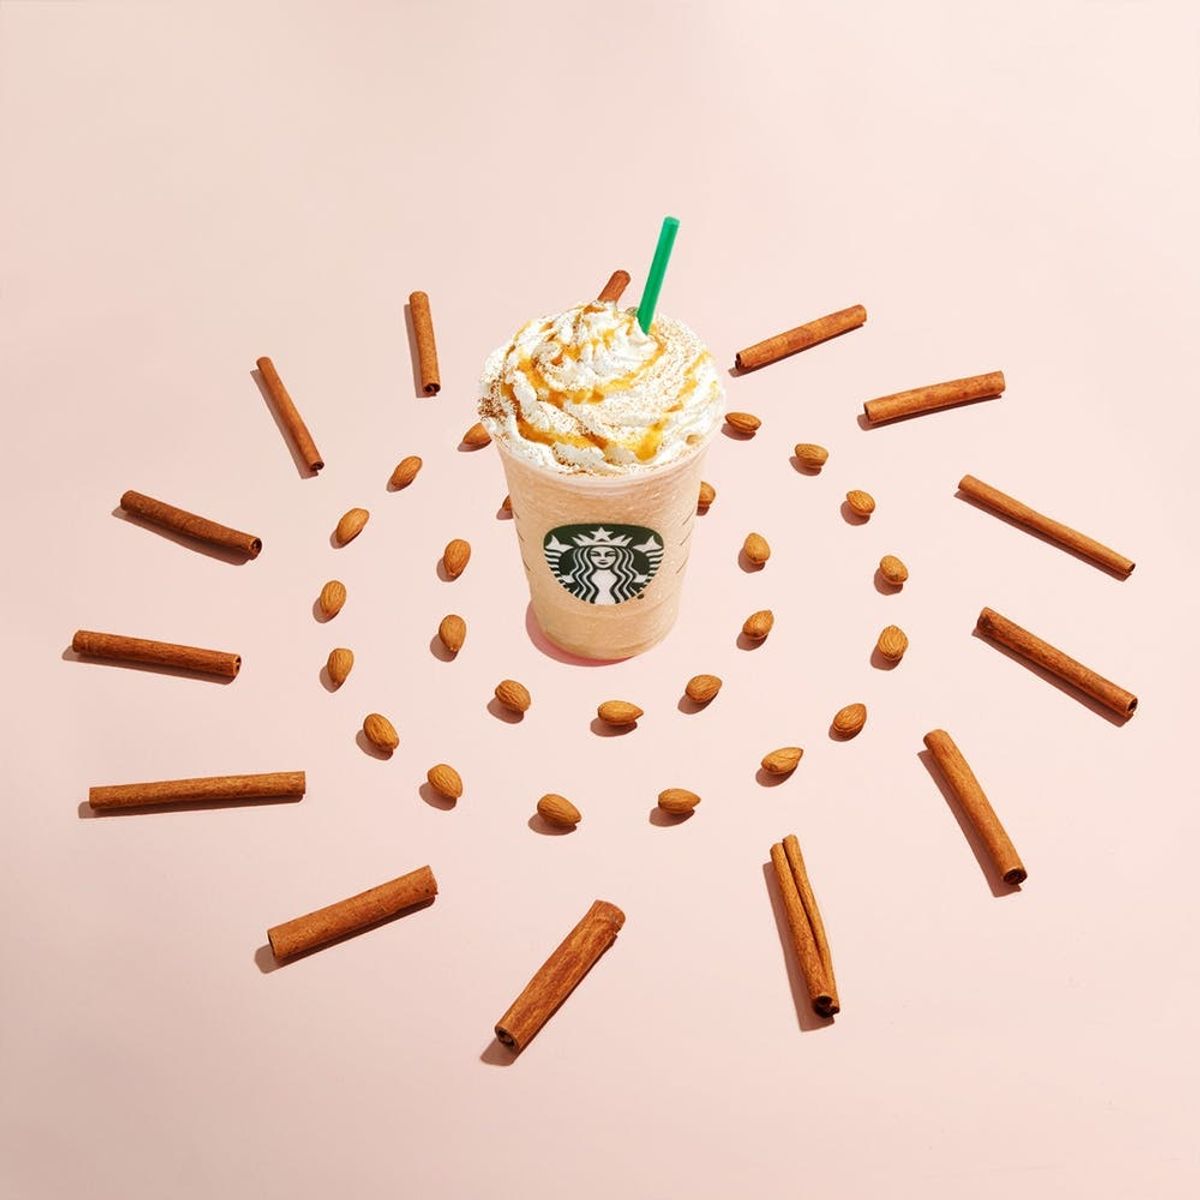 Starbucks Introduces a New Horchata Almond Milk Frappuccino